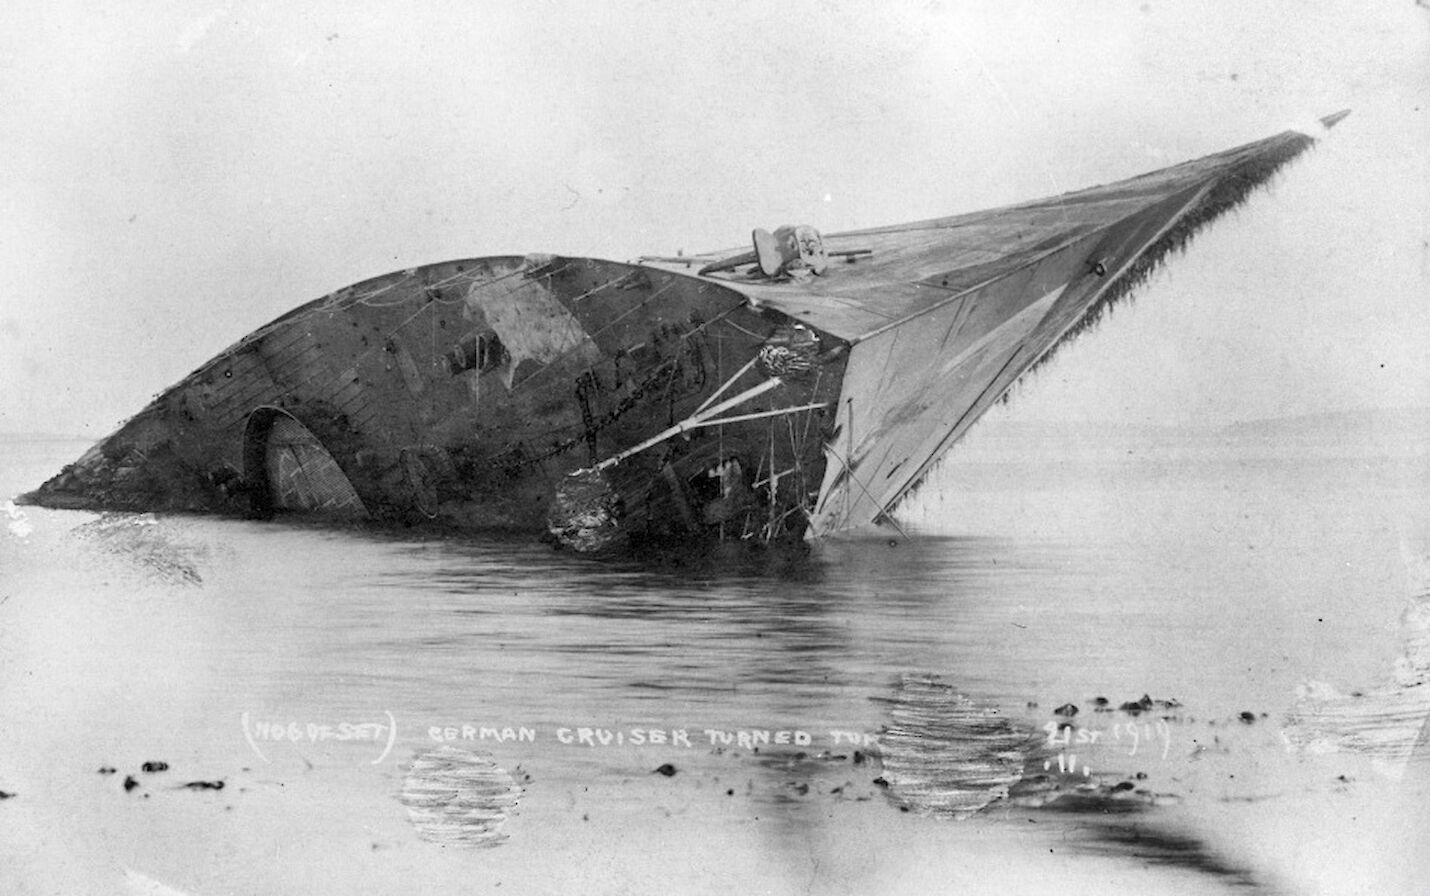 The light cruiser Bremse turned turtle in Scapa Flow - image courtesy Orkney Library & Archive